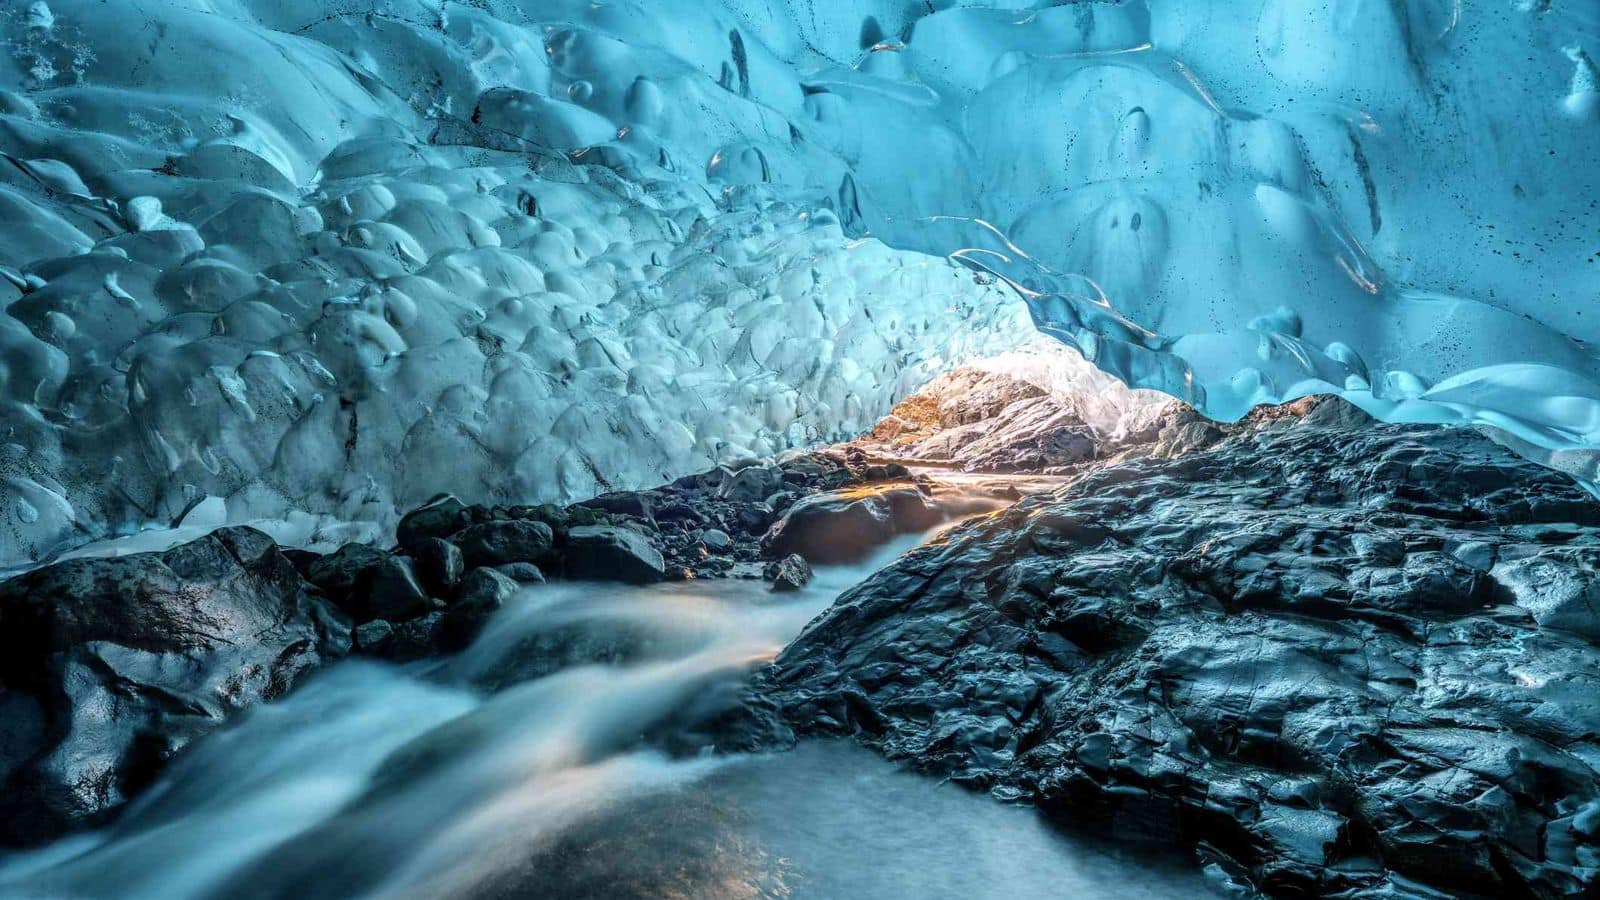 Venture beneath Vatnajokull, Iceland's glacial marvel with these recommendations